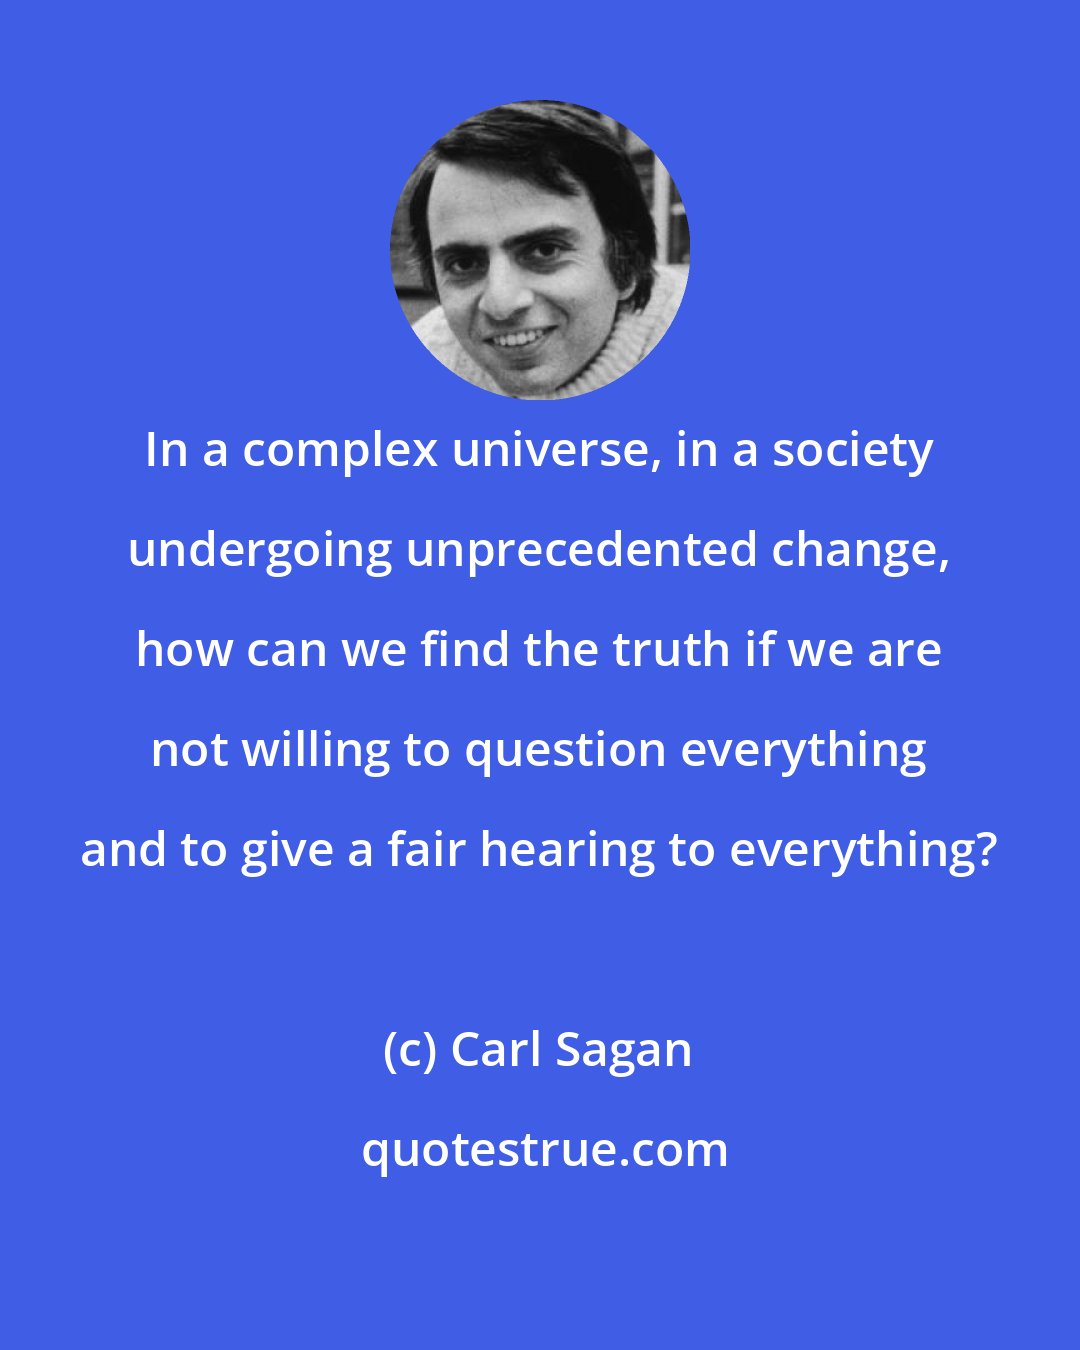 Carl Sagan: In a complex universe, in a society undergoing unprecedented change, how can we find the truth if we are not willing to question everything and to give a fair hearing to everything?